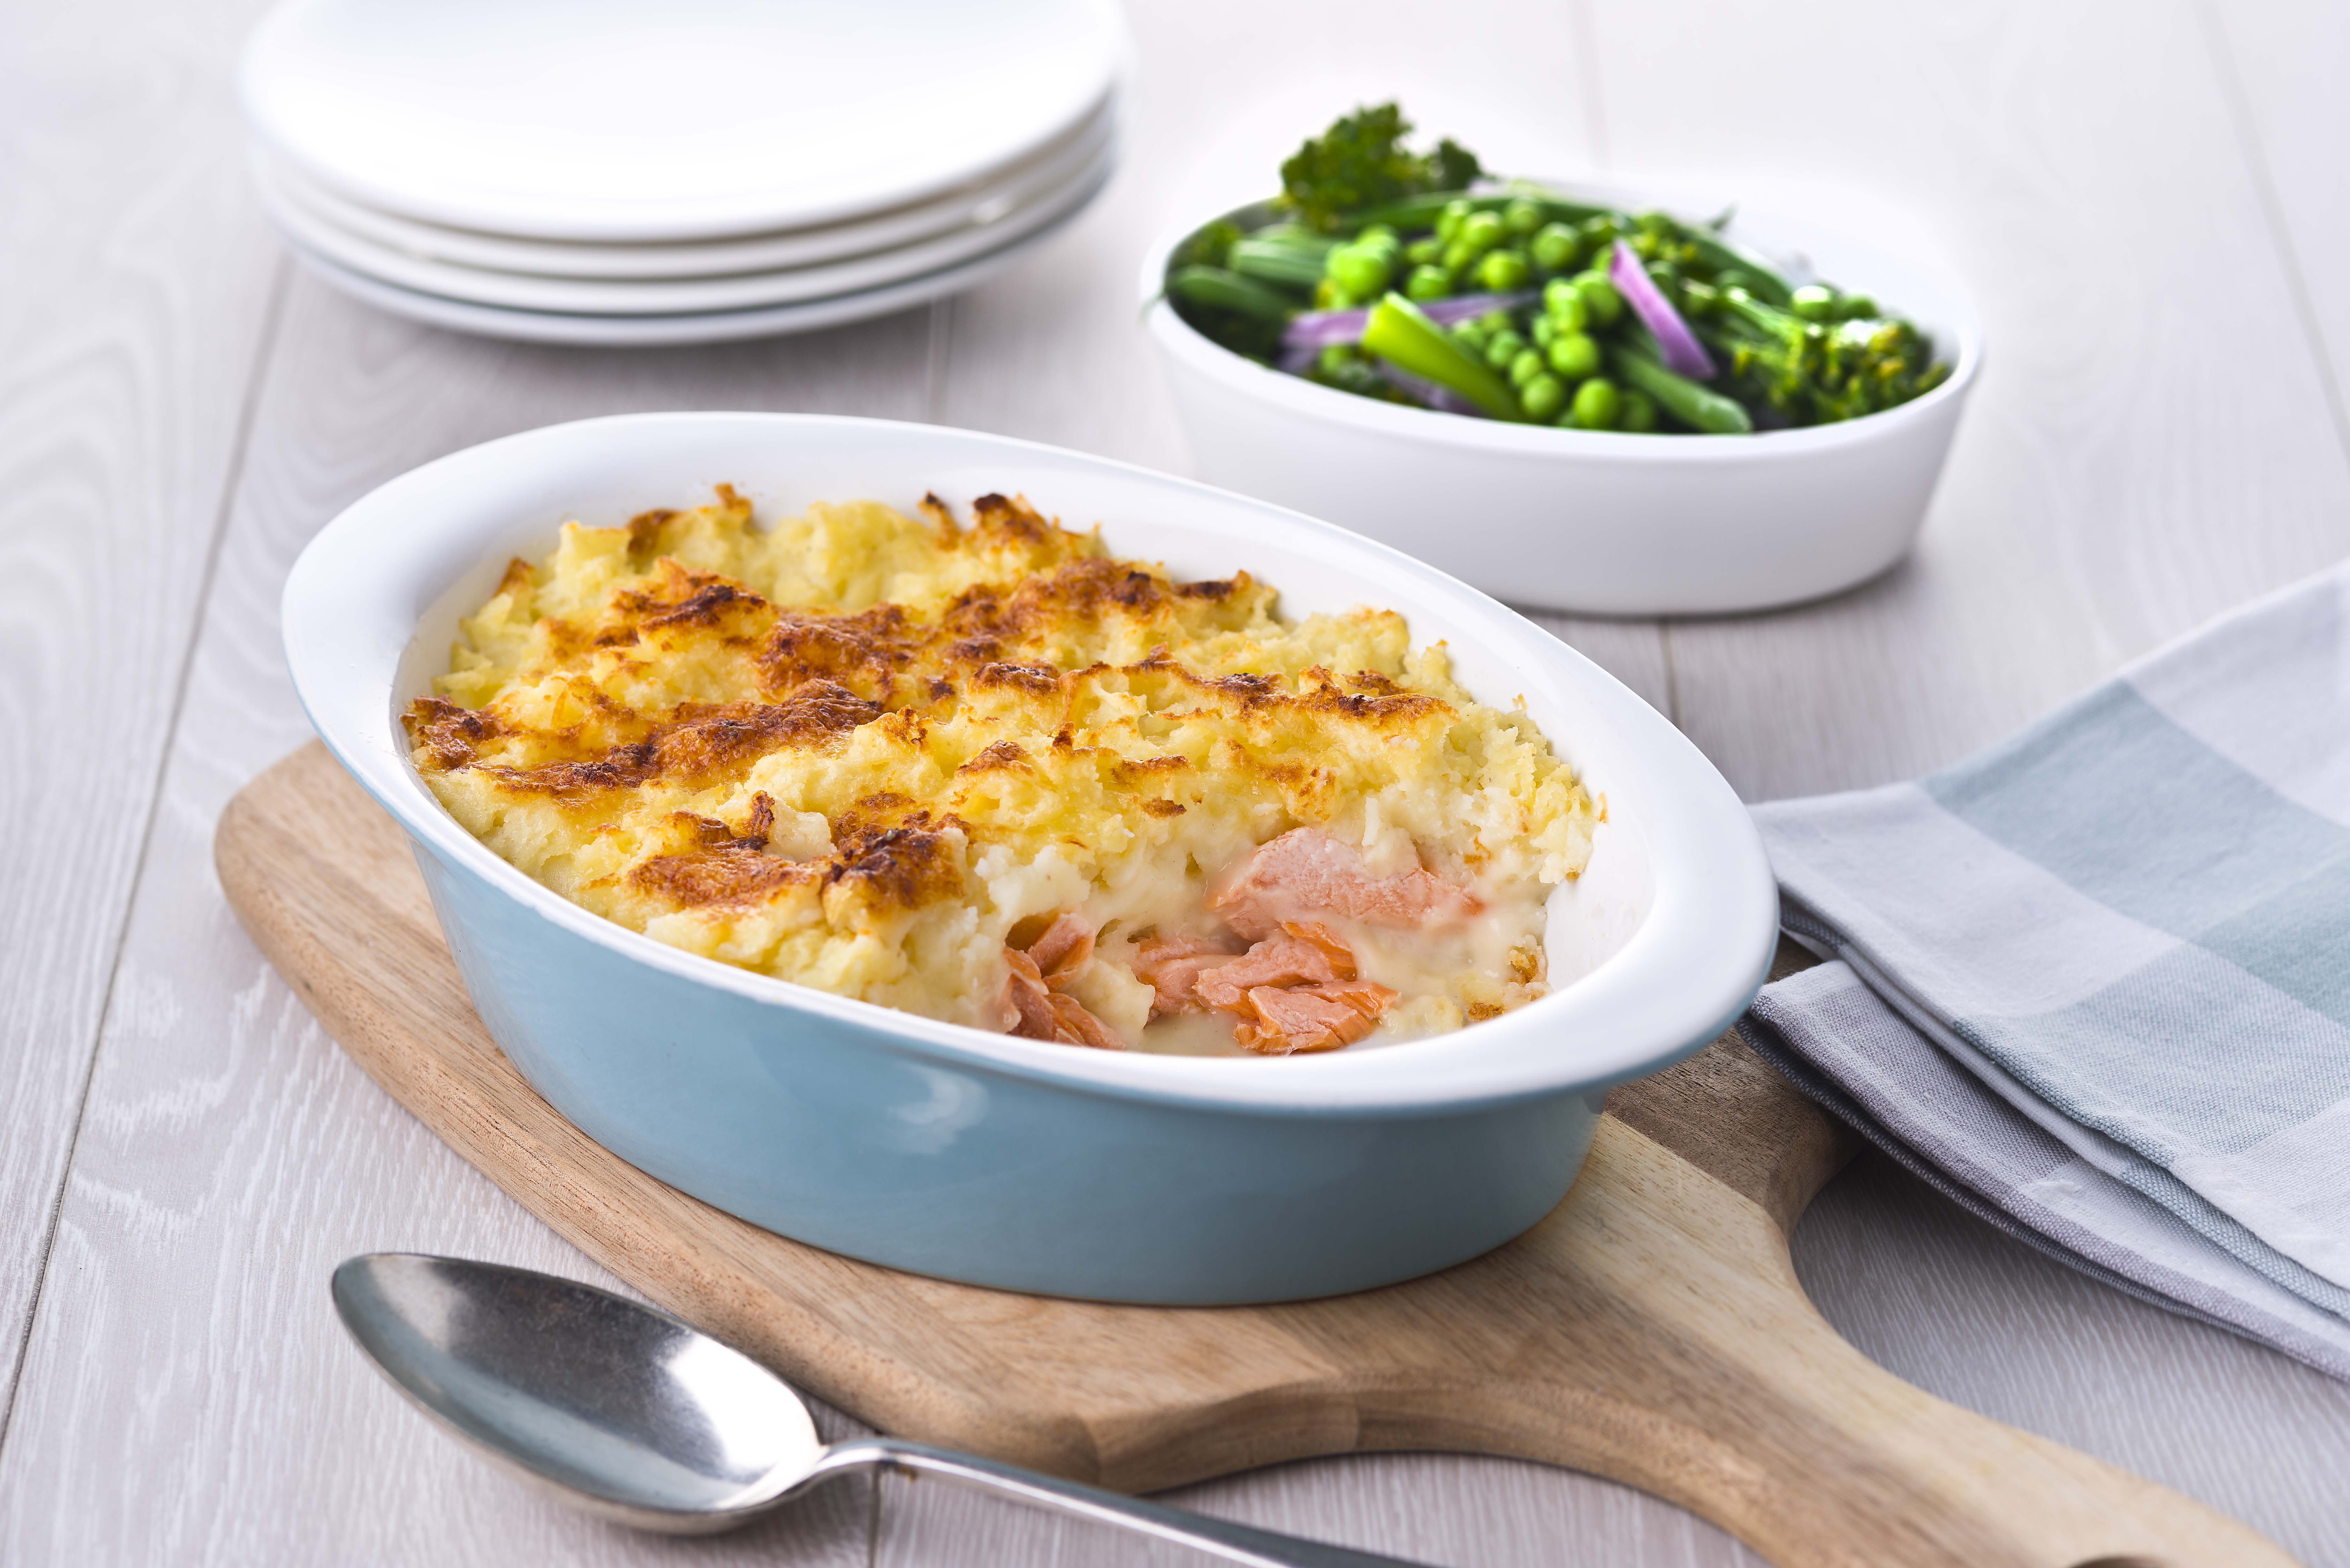 A dish of fish pie with a side serving of vegetables